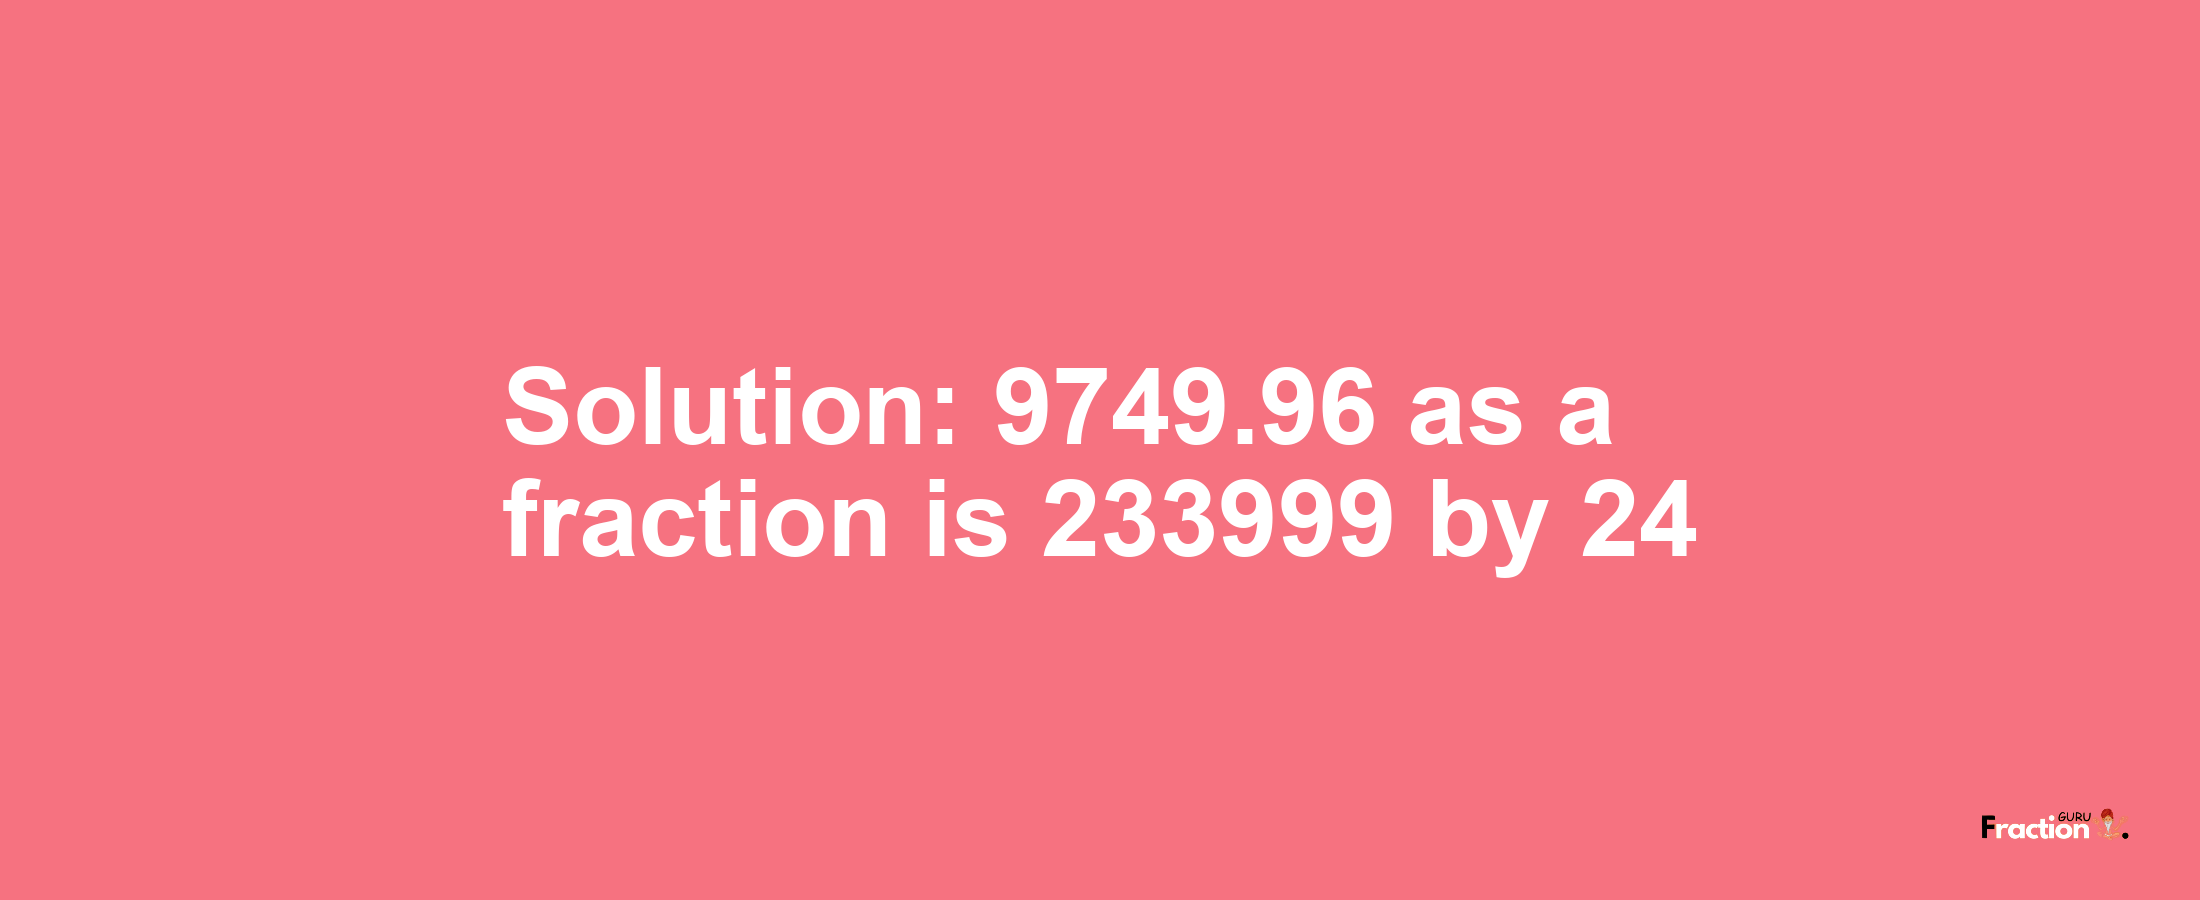 Solution:9749.96 as a fraction is 233999/24